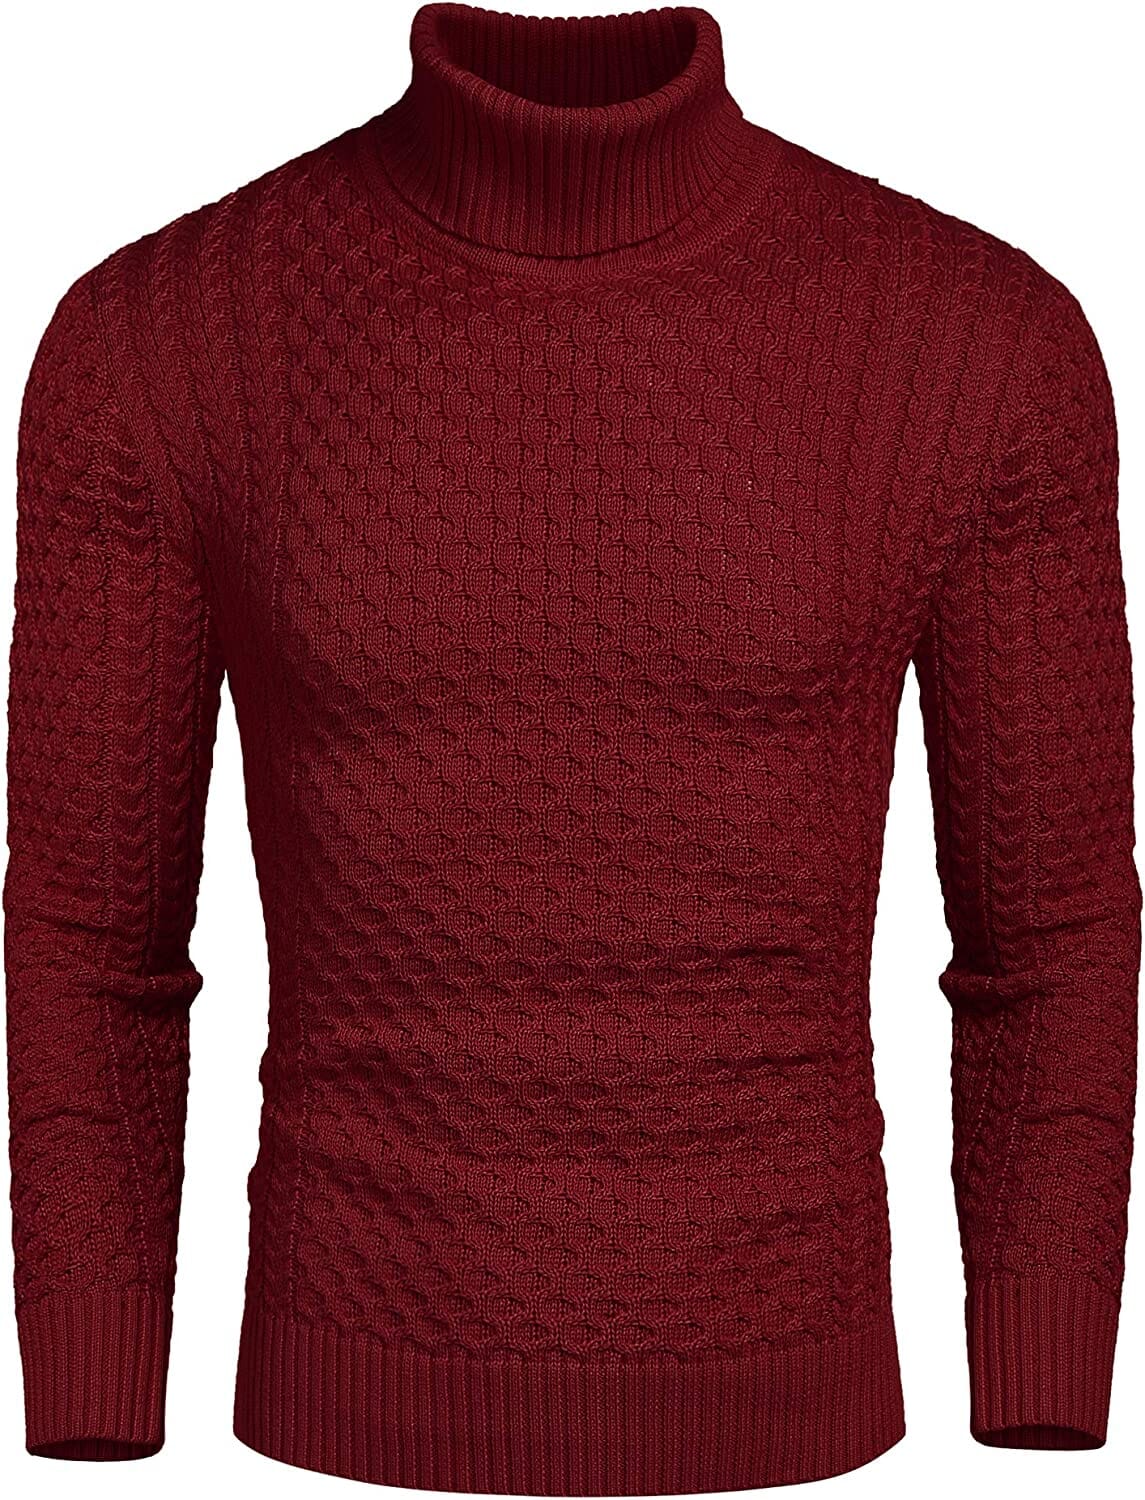 Slim Fit Turtleneck Knitted Twisted Pullover Sweaters (US Only) Sweaters Coofandy's Wine Red S 